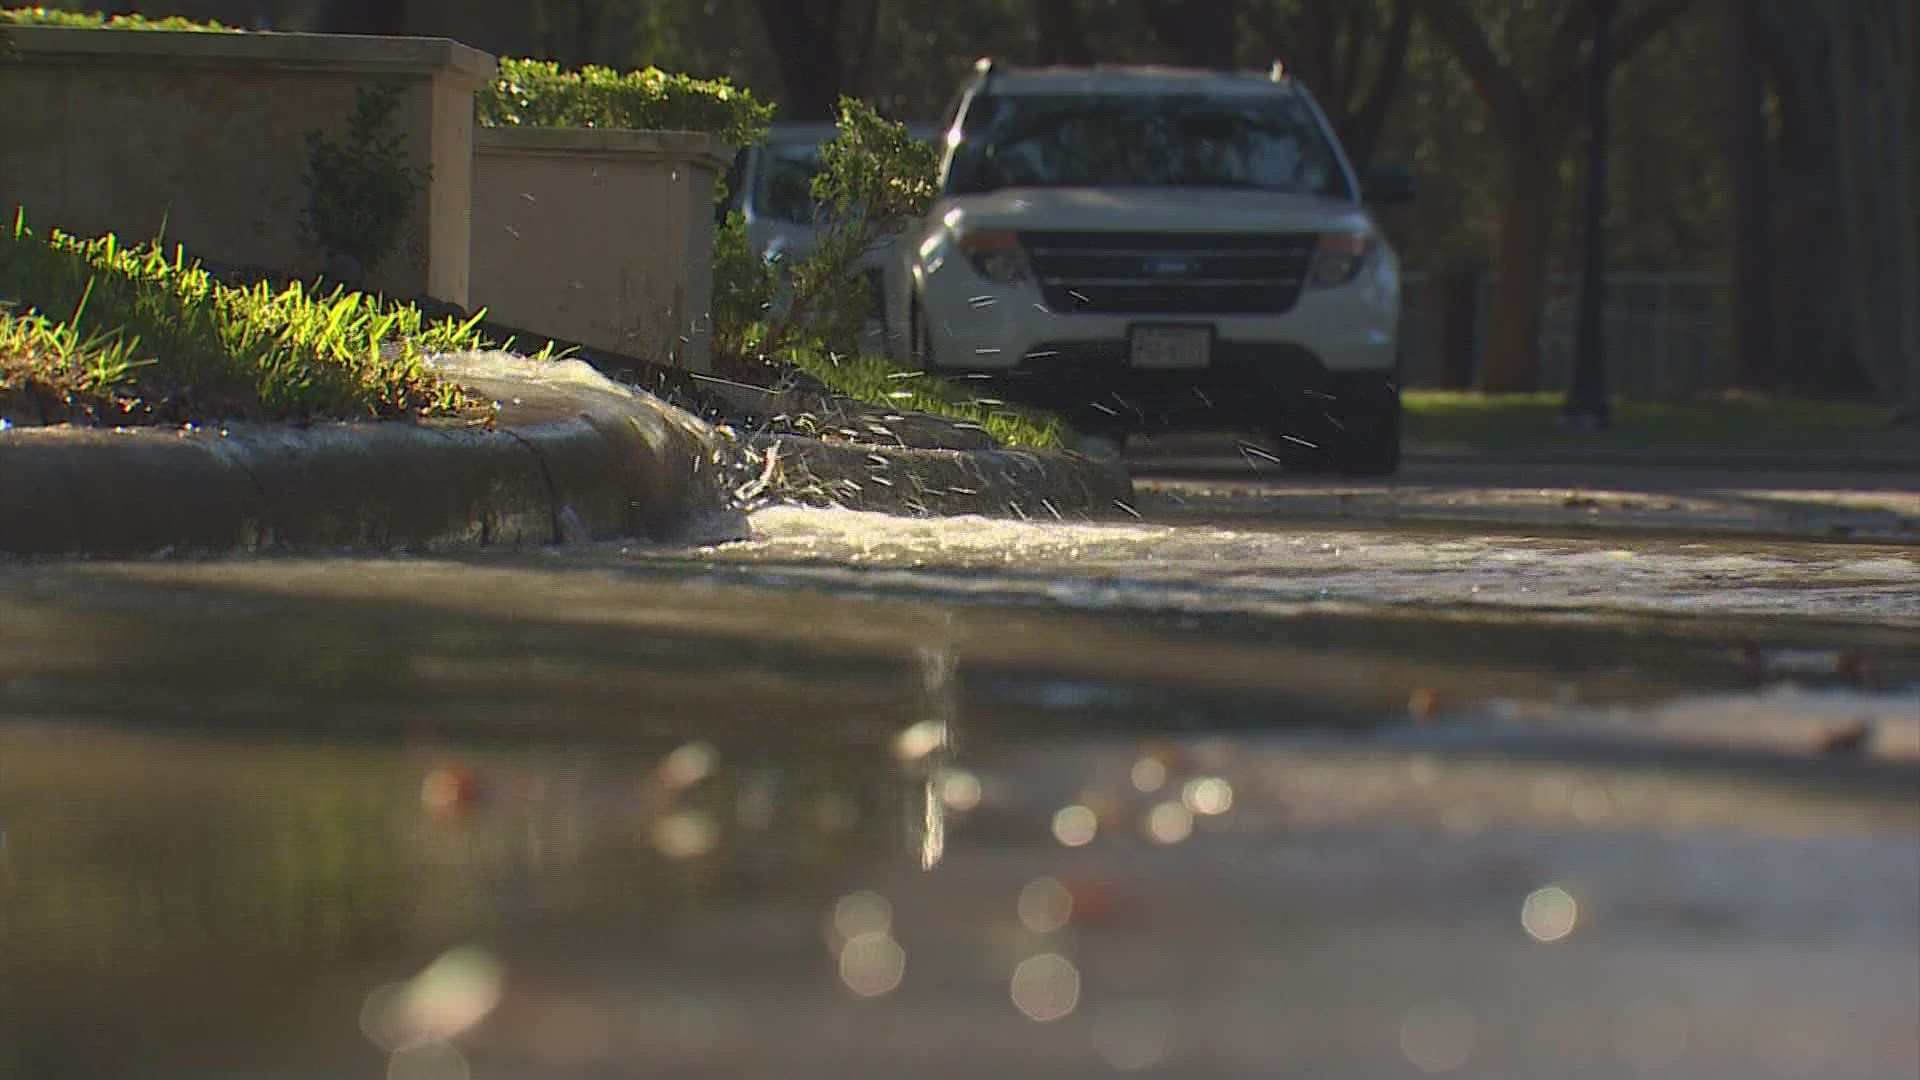 Residents, including former Houston mayoral candidate Bill King, said the water has been leaking since Christmas.